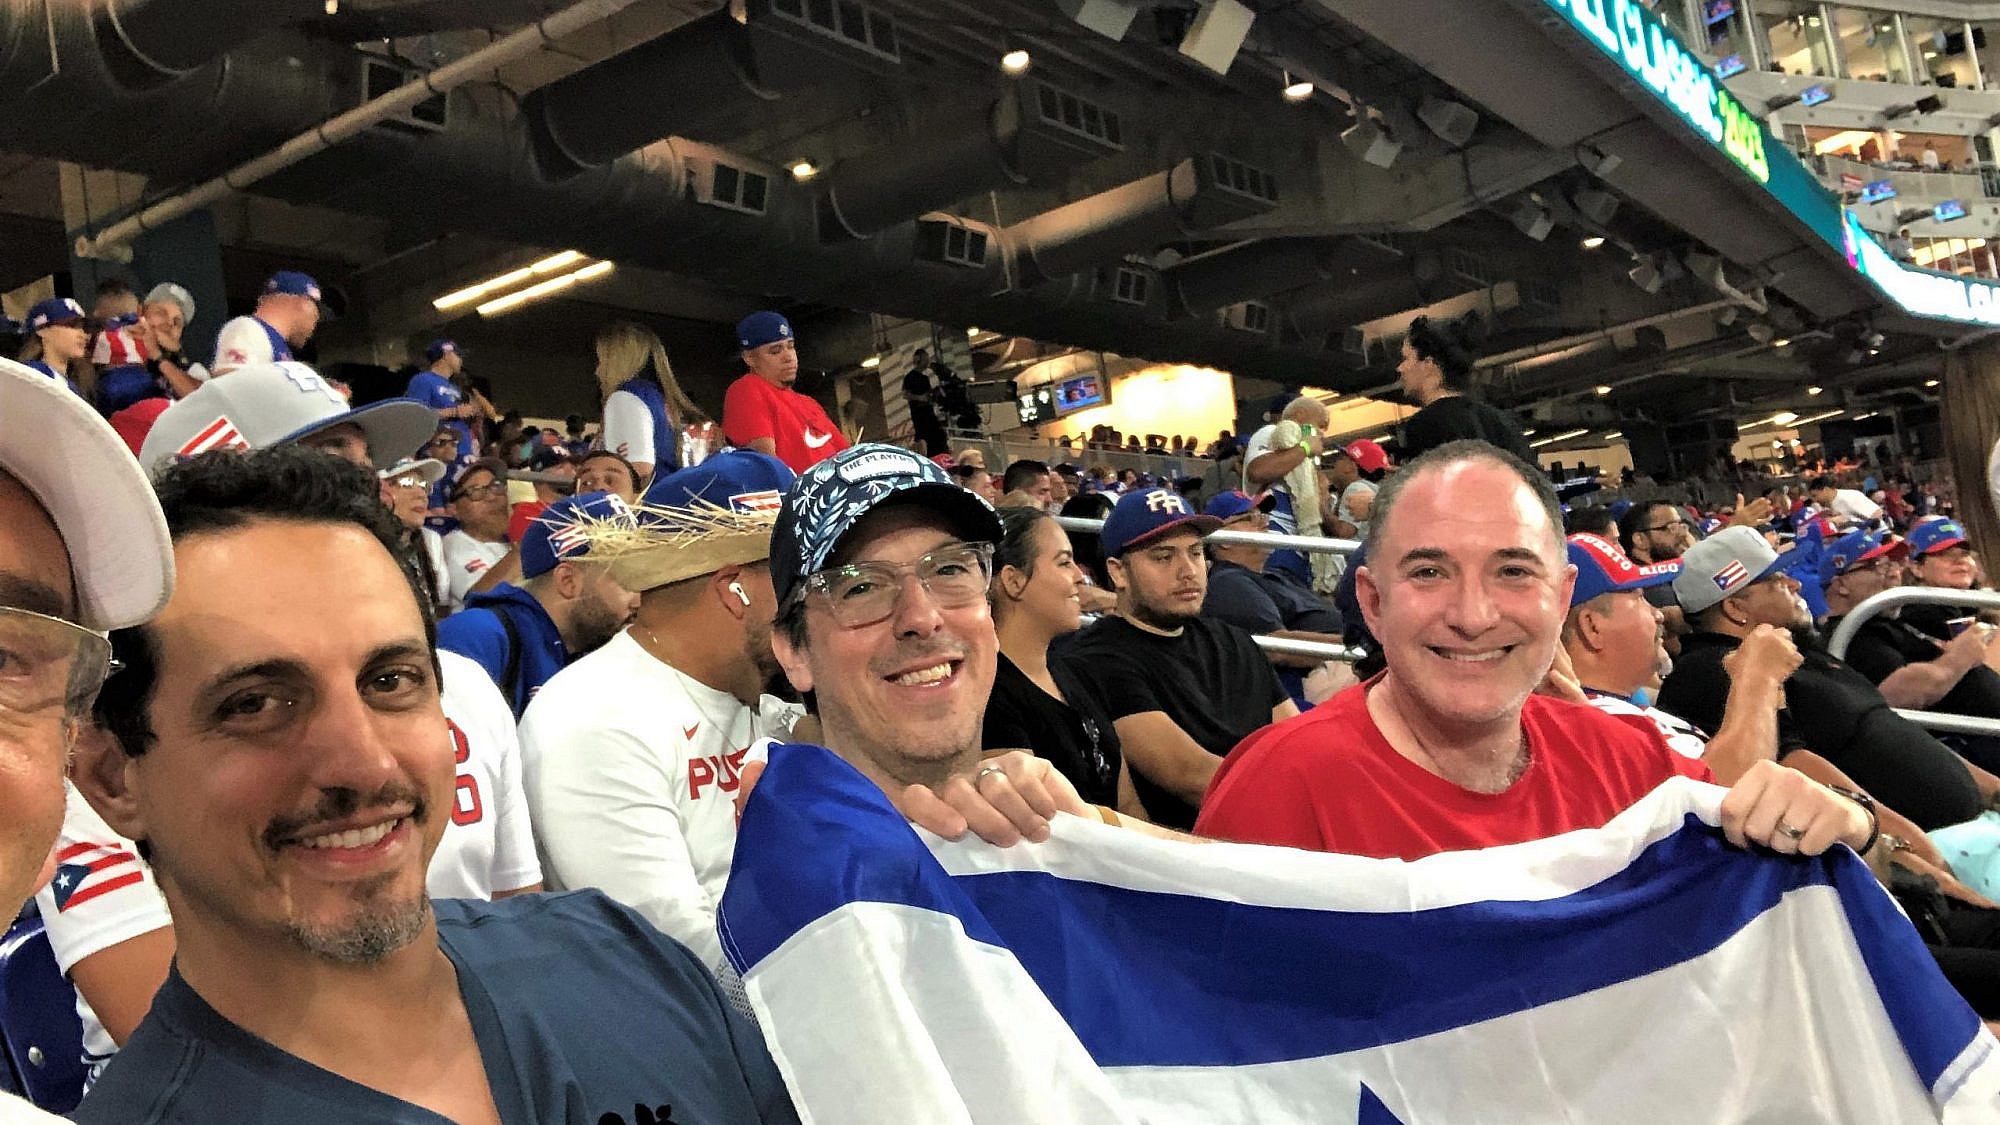 Jared Green and a half-dozen friends have a 30-year tradition of visiting ballparks that dates back to when they were fellow staffers at Camp Ramah in Canada. Photo by Howard Blas.